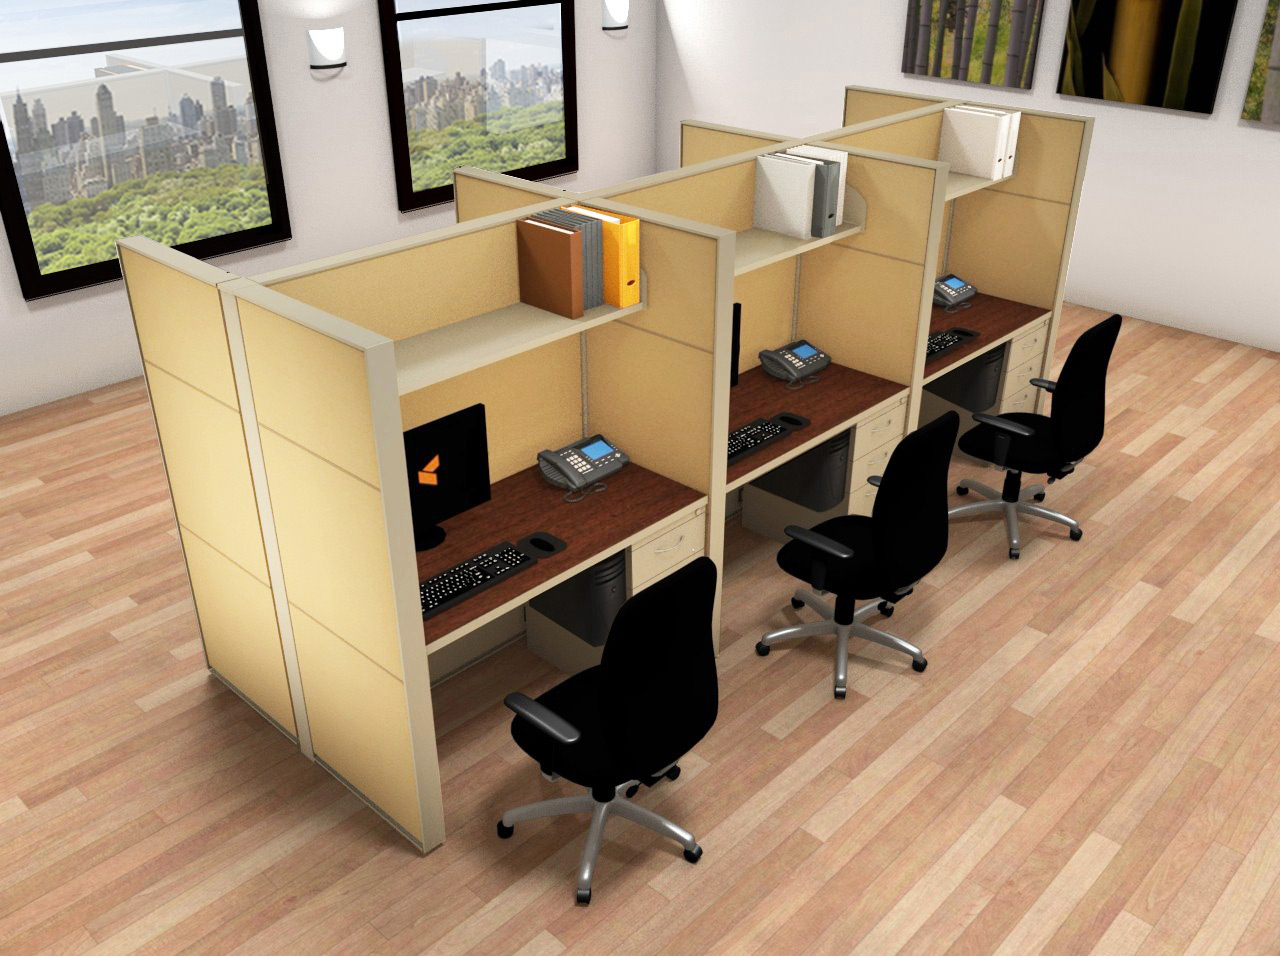 2x4 Cubicle Workstations from AIS - 6 Pack Cluster